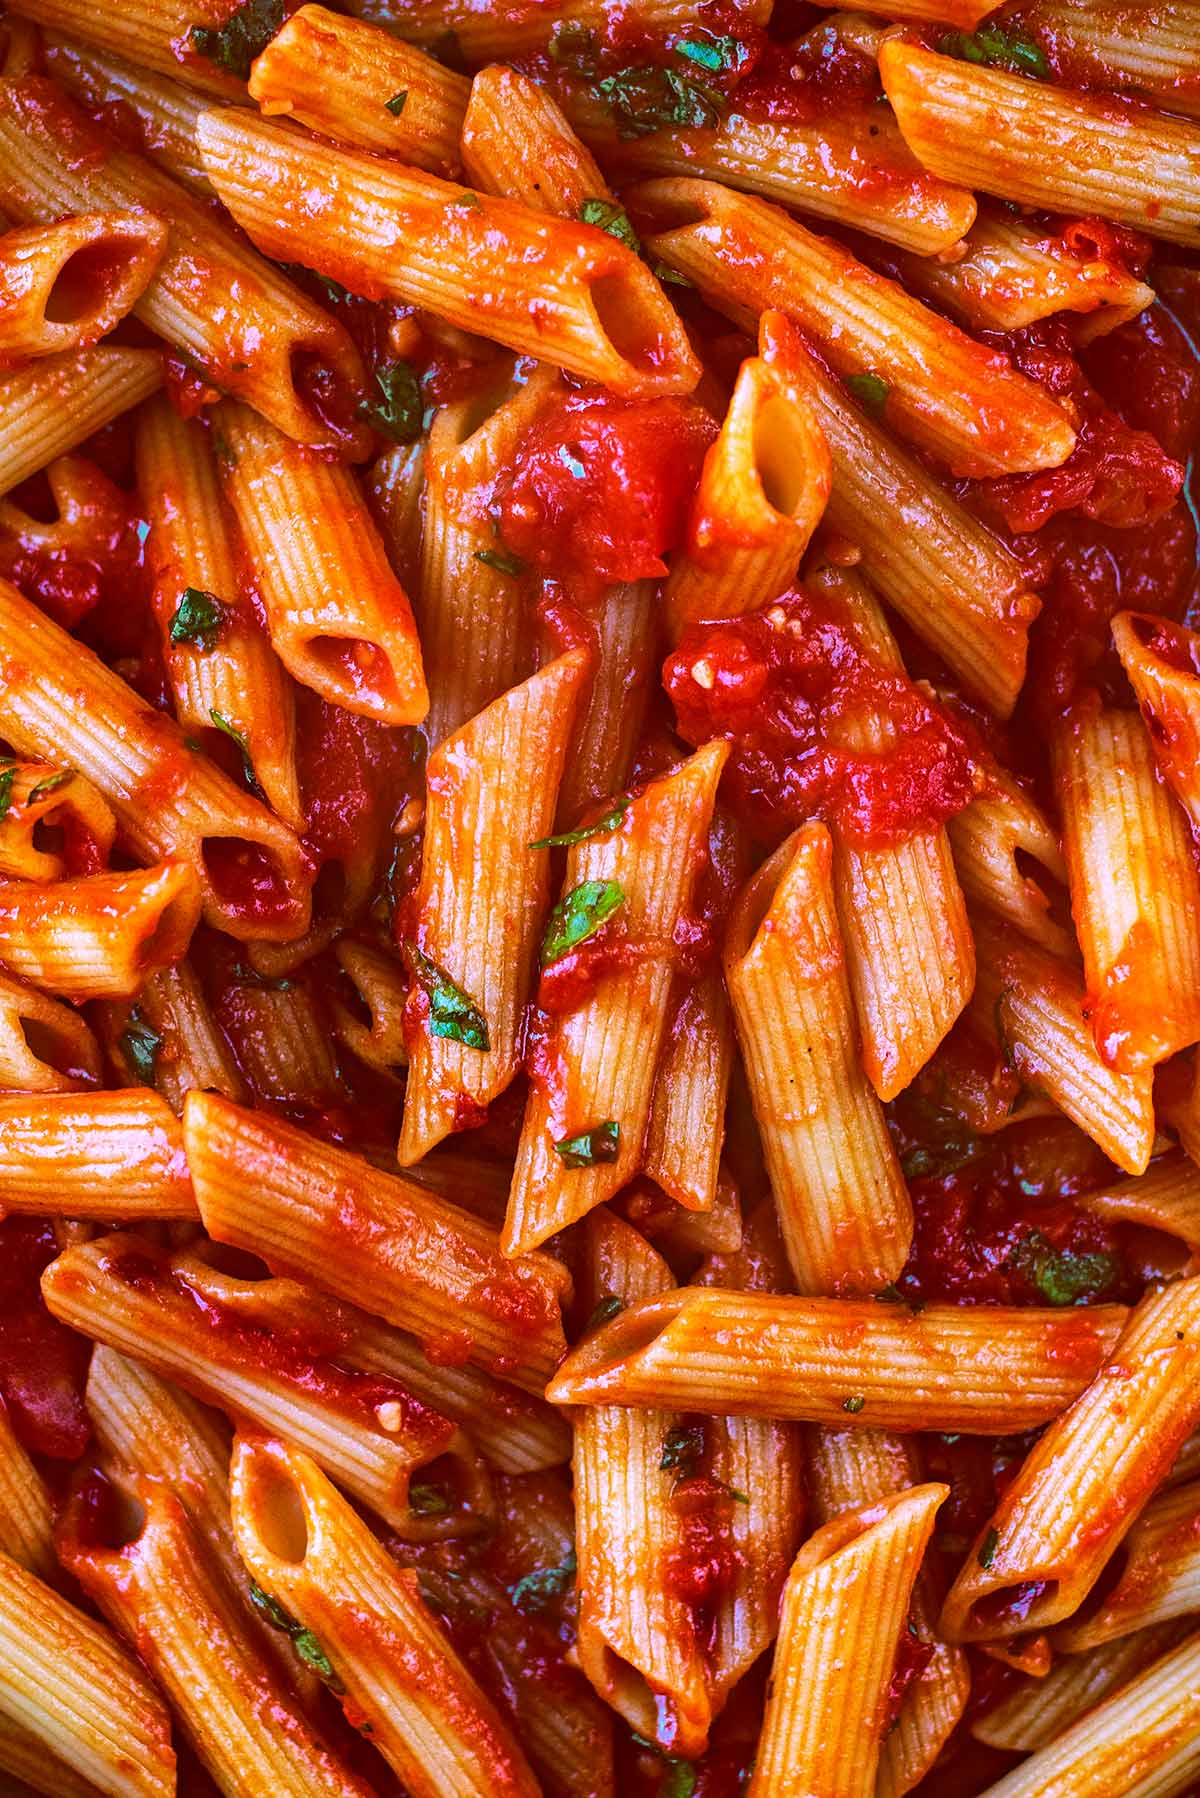 Penne pasta mixed together with a spicy tomato sauce.